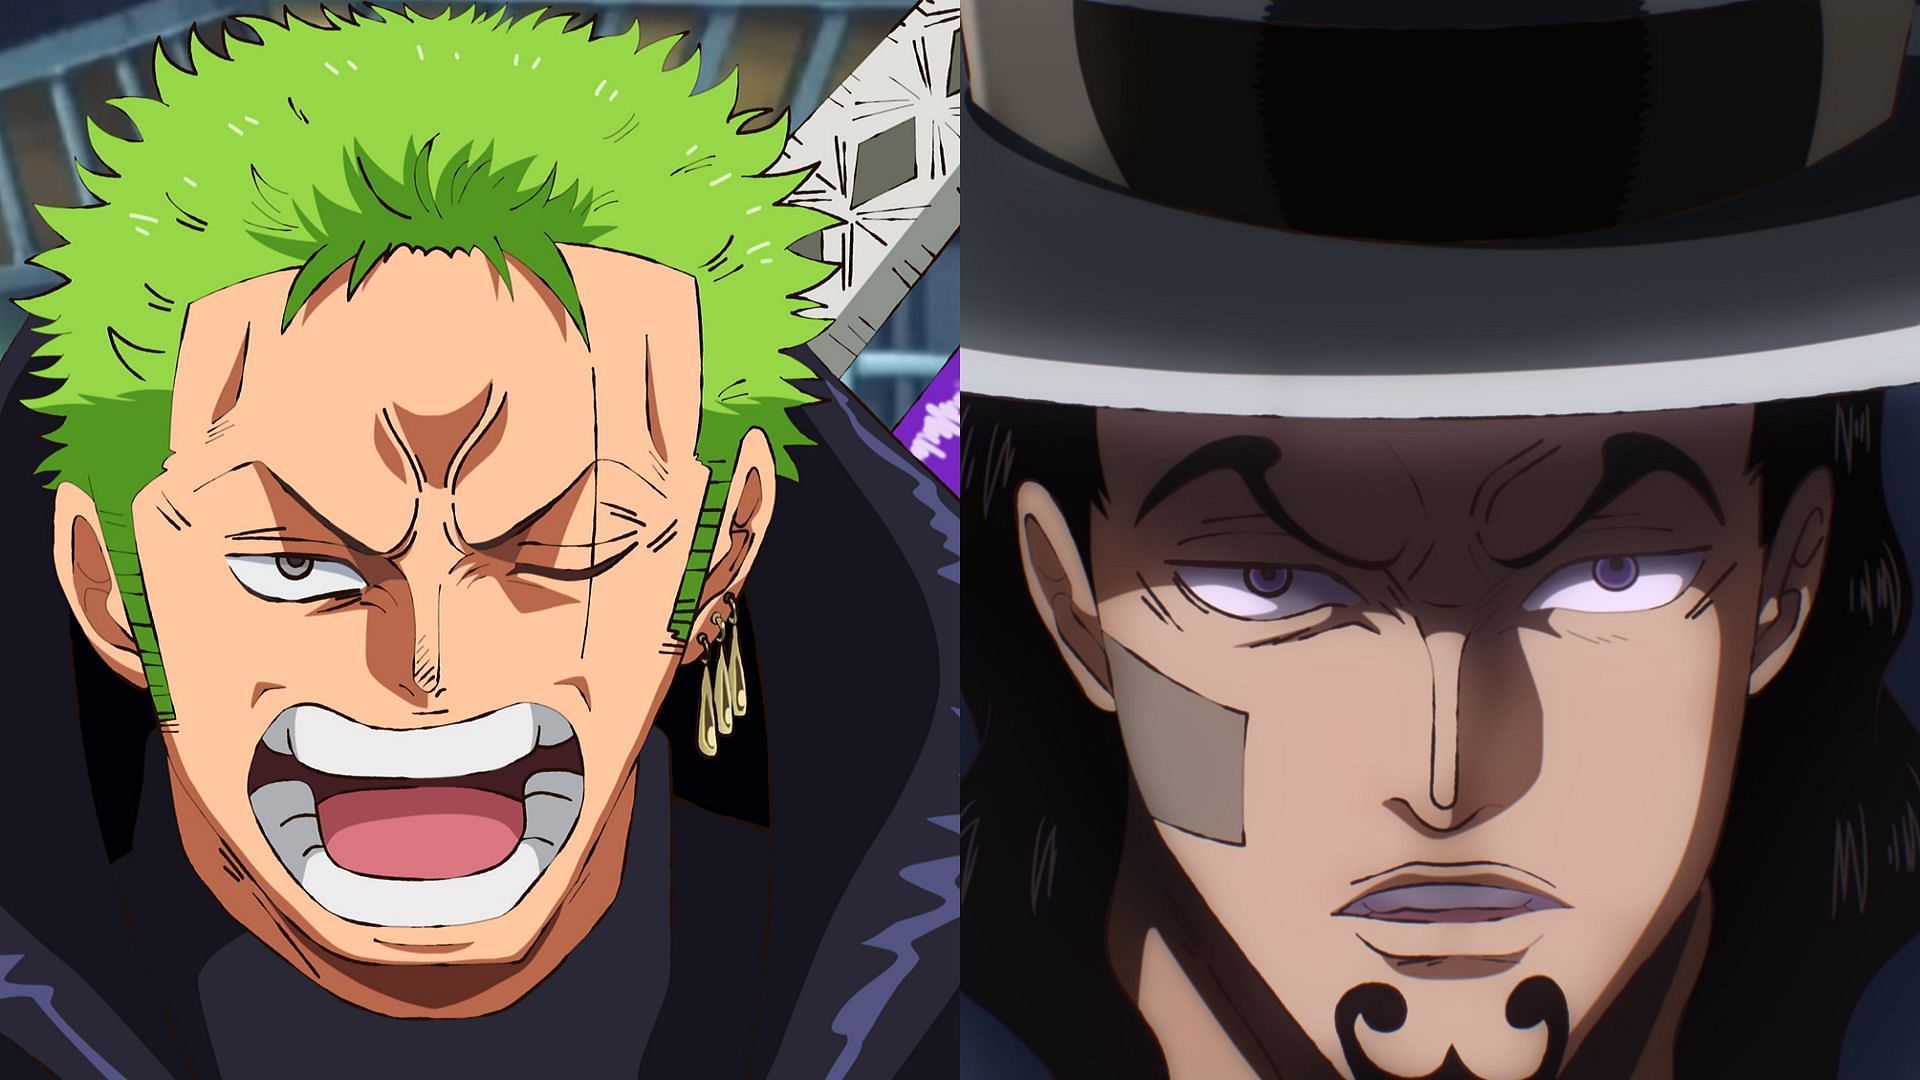 One Piece chapter 1091: Why Zoro vs Lucci makes sense